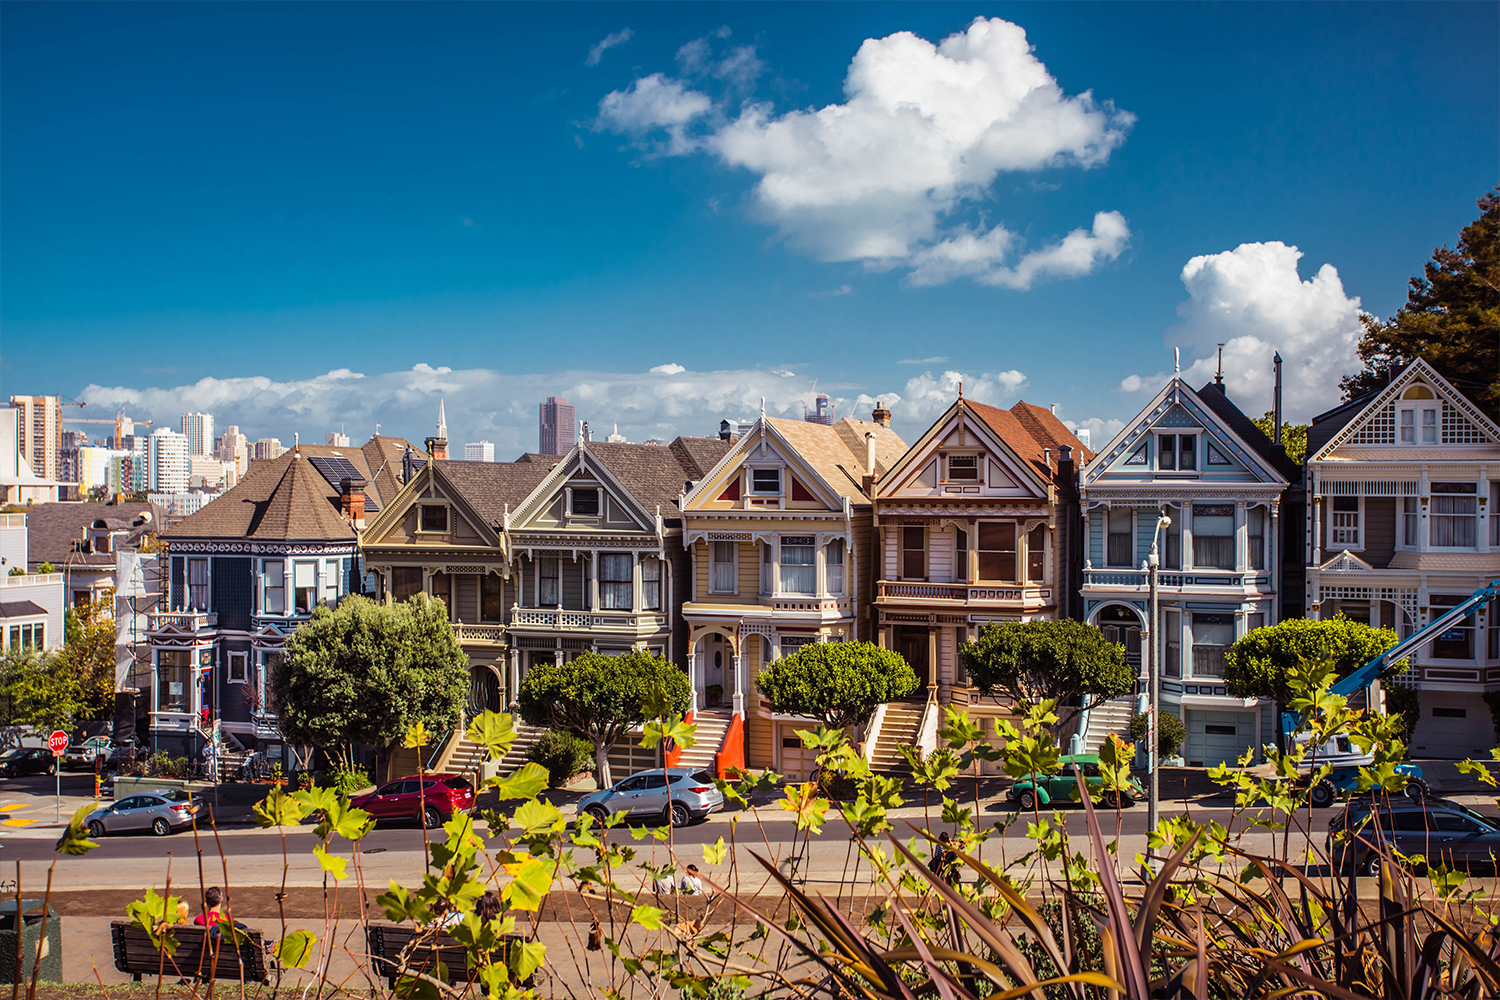 A Leading San Francisco Realtor Shares His Predictions for 2021